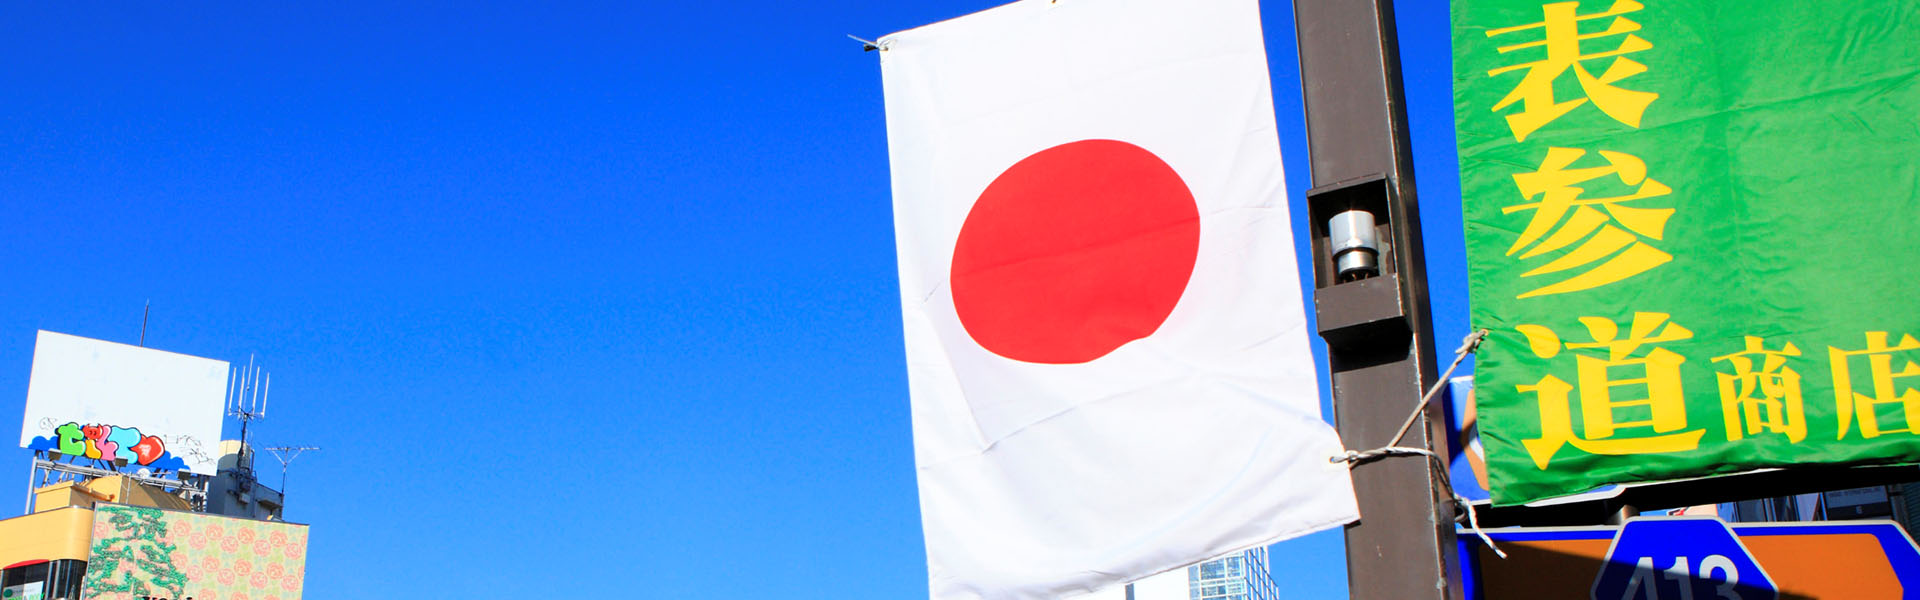 Doing Business in Japan | World Business Culture